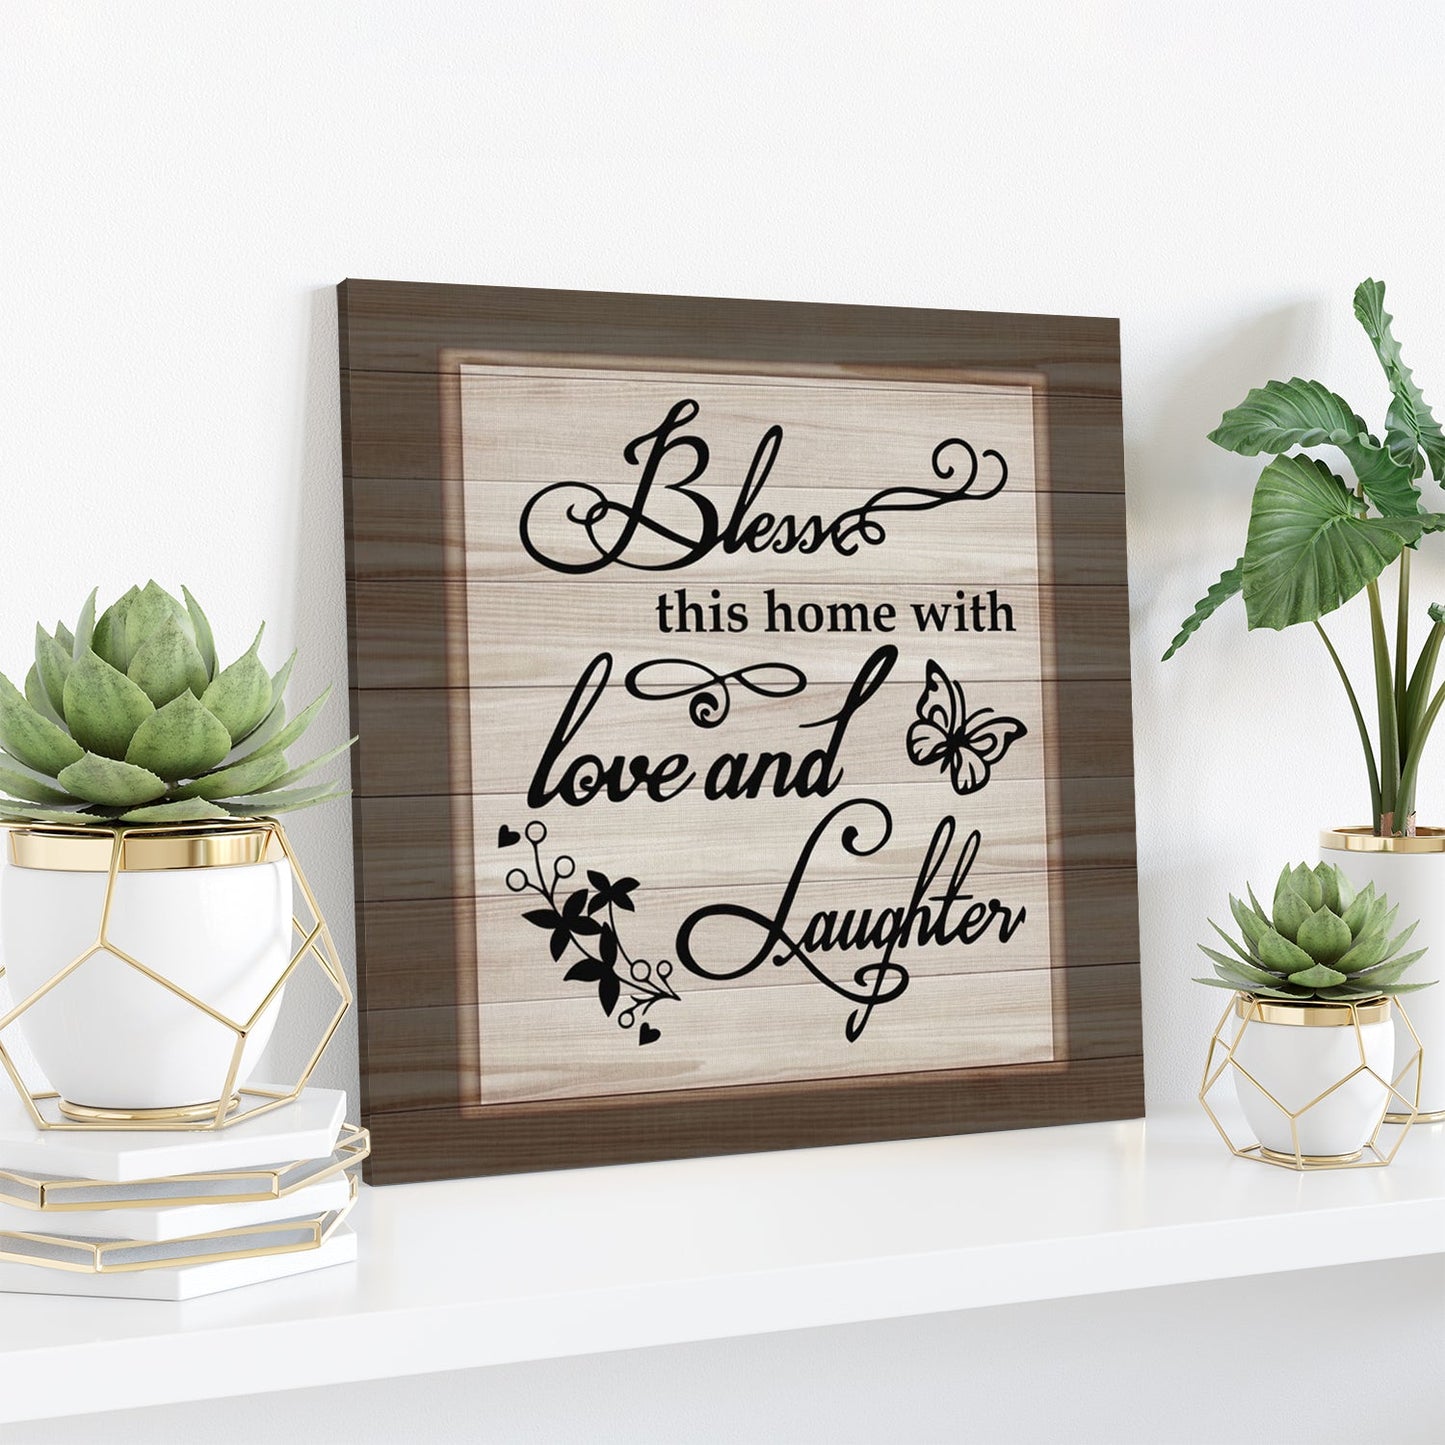 Bible Verse Canvas - Bless This Home With Love And Laughter Canvas Print - Scripture Canvas Wall Art - Ciaocustom